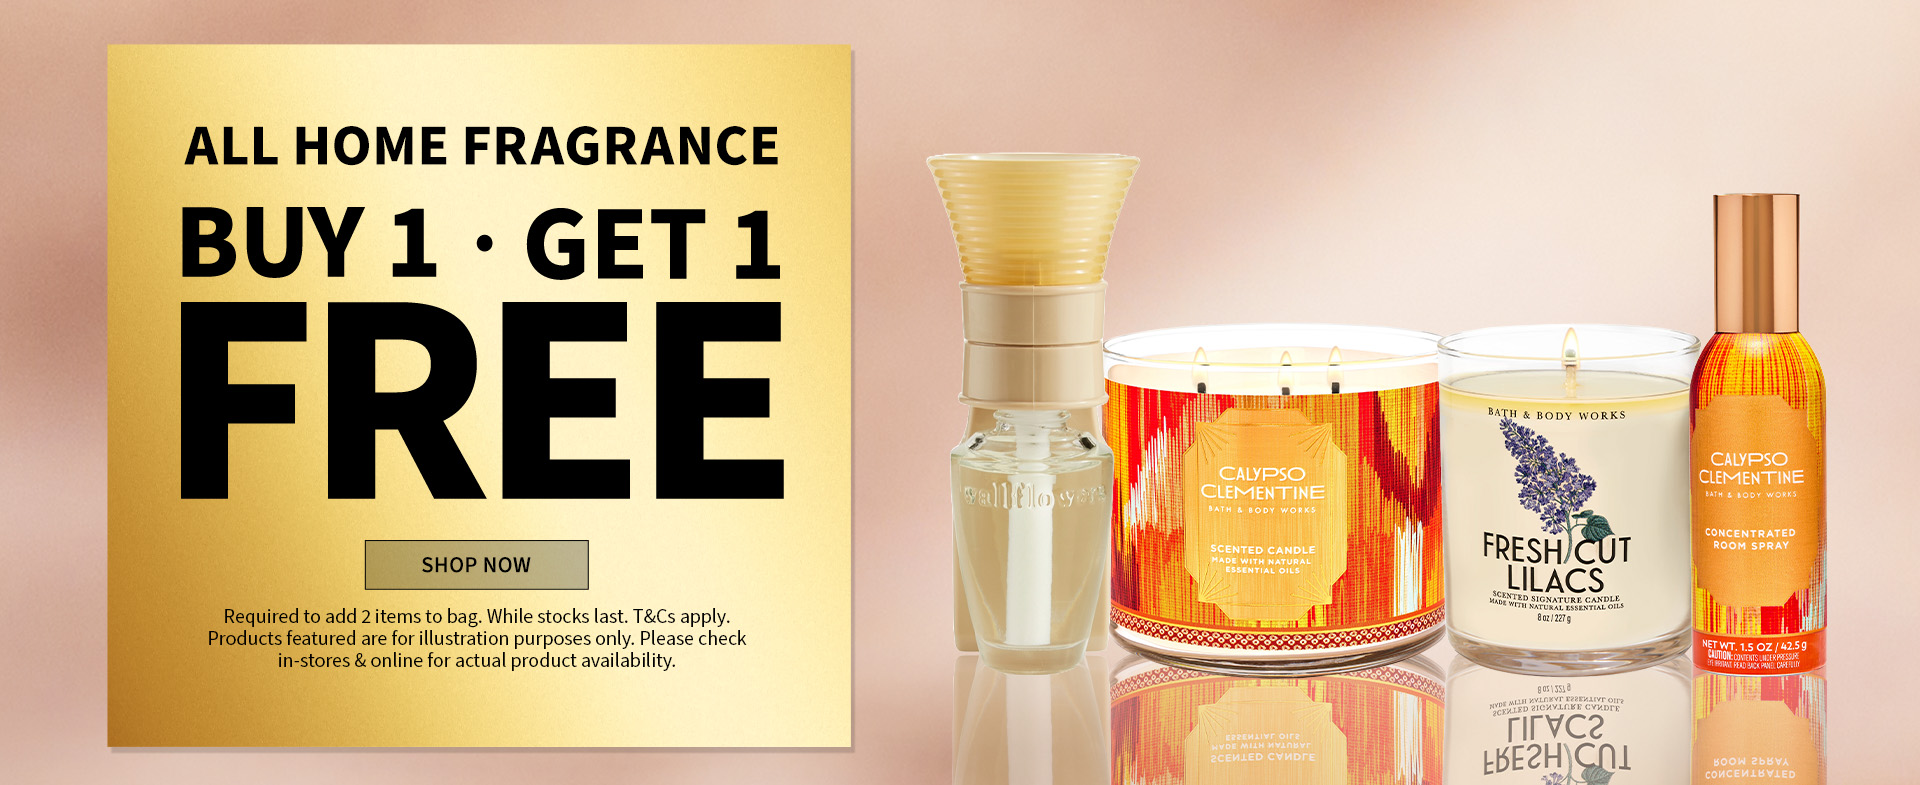 ALL HOME FRAGRANCE BUY 1, GET 1 FREE